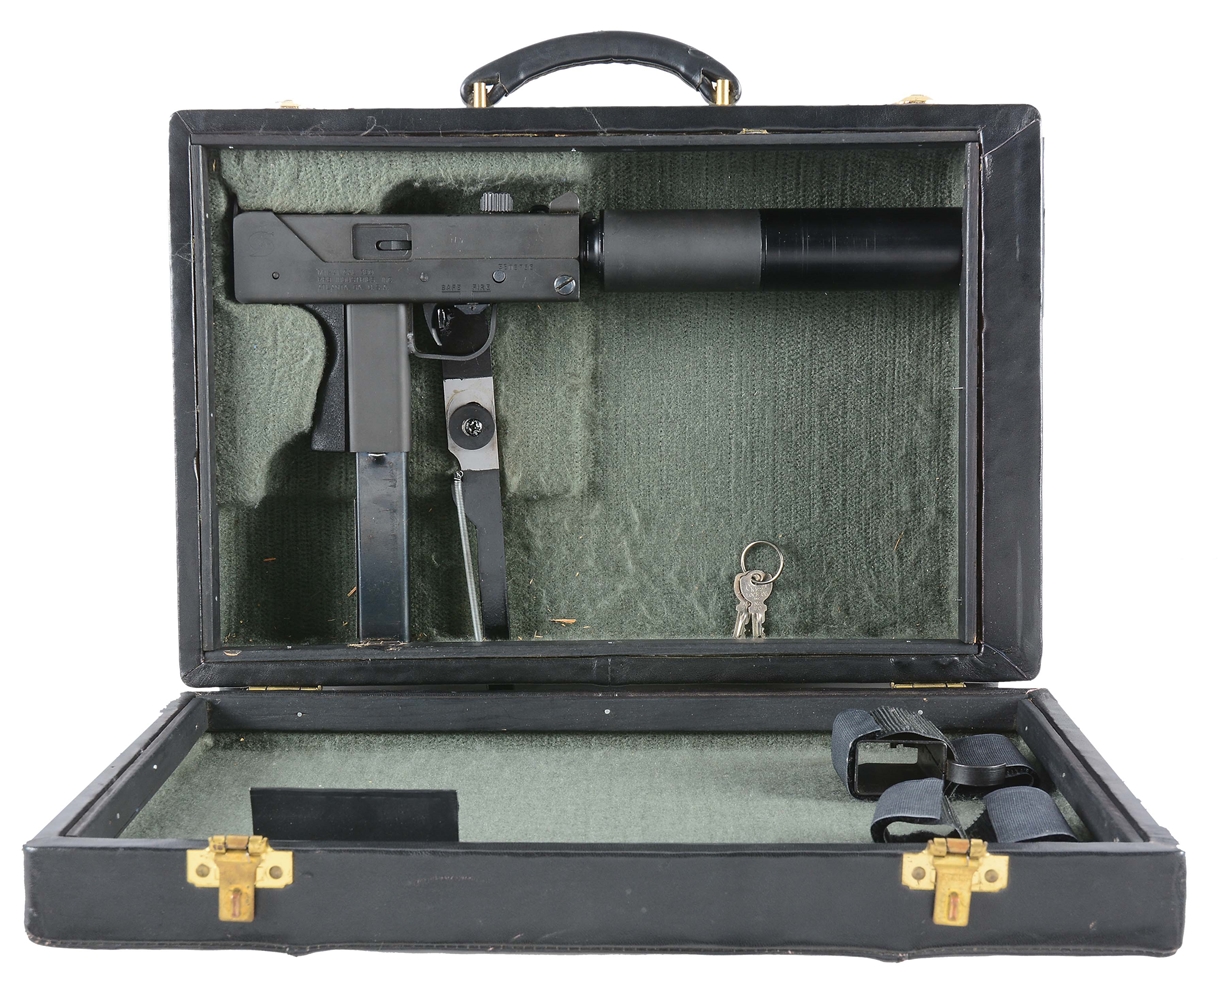 (N) RPB INDUSTRIES MAC M11-A1 .380 AUTO MACHINE GUN WITH SWD COBRAY M11 SUPPRESSOR IN COVERT OPERATIONS BRIEFCASE (FULLY TRANSFERABLE & SUPPRESSOR).